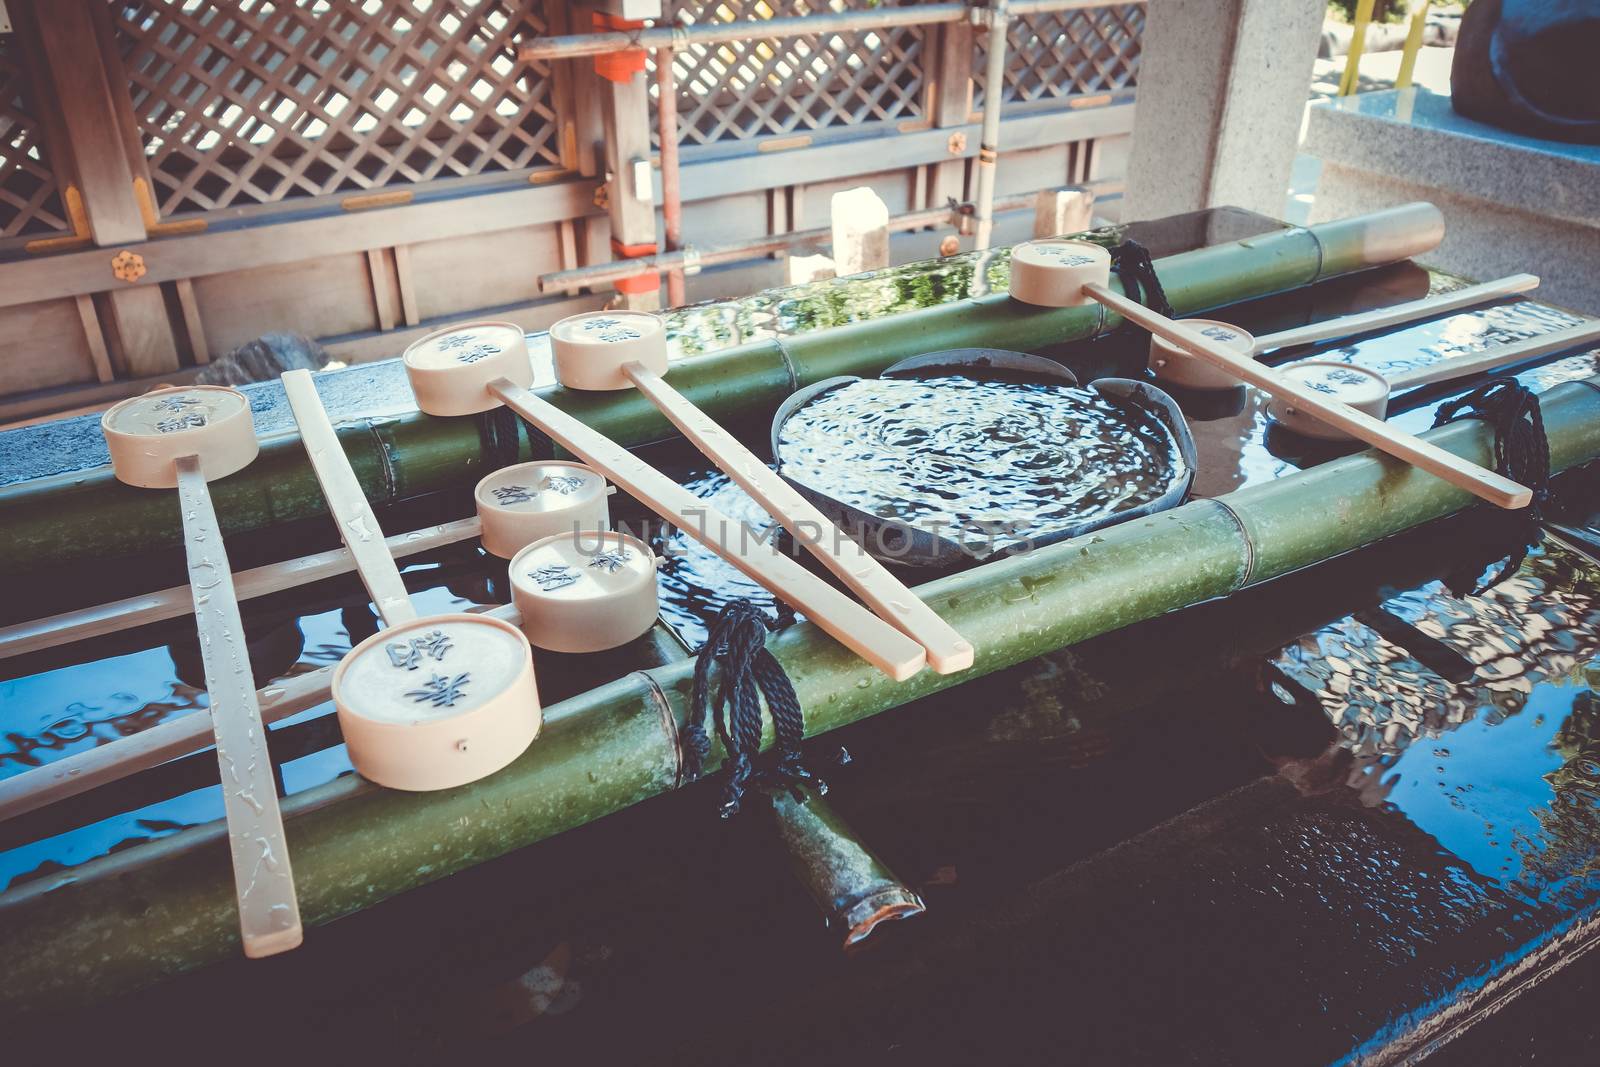 Purification fountain at a Shrine, Tokyo, Japan by daboost